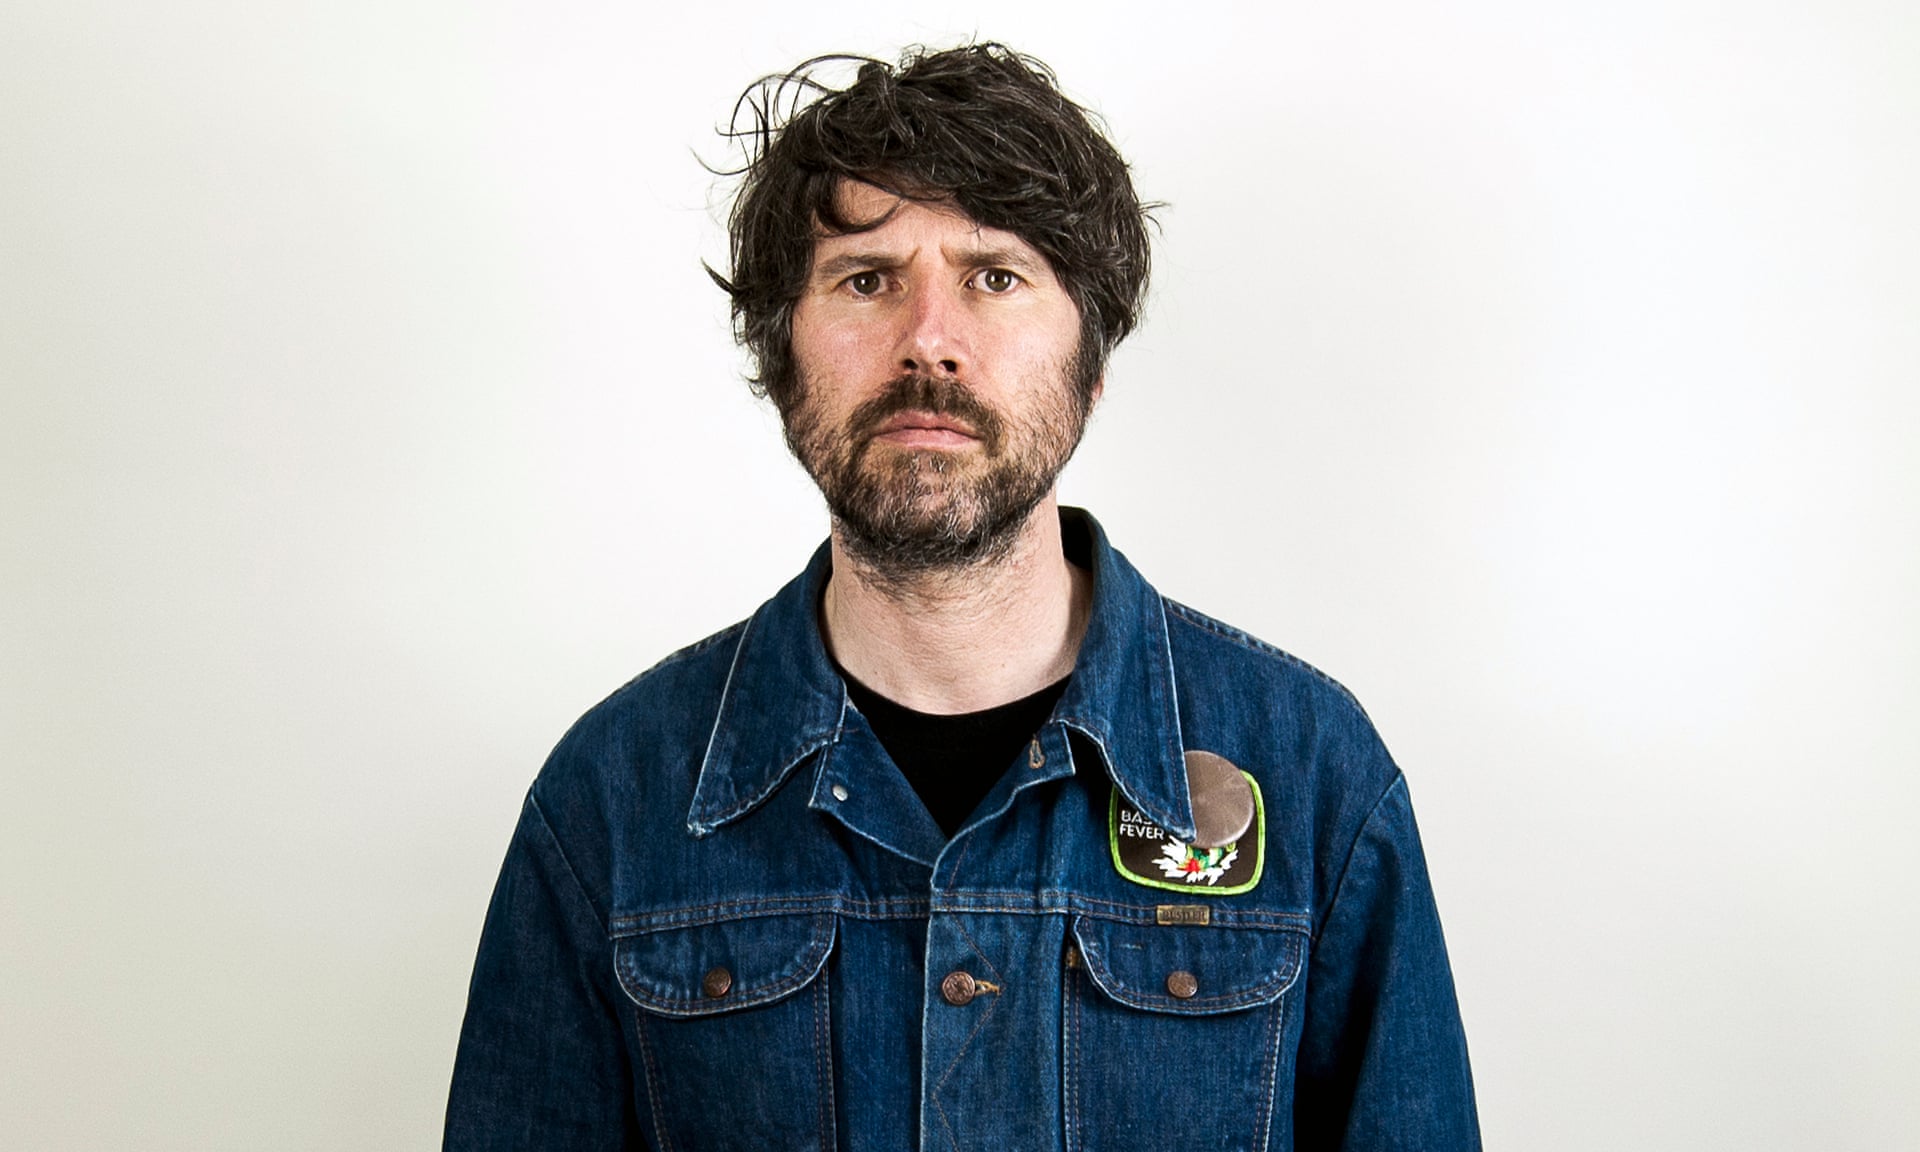 Listen: Gruff Rhys talks new album 'Pang' & celebrates 20 years of 'Guerrilla' on 'Kyle Meredith with...'